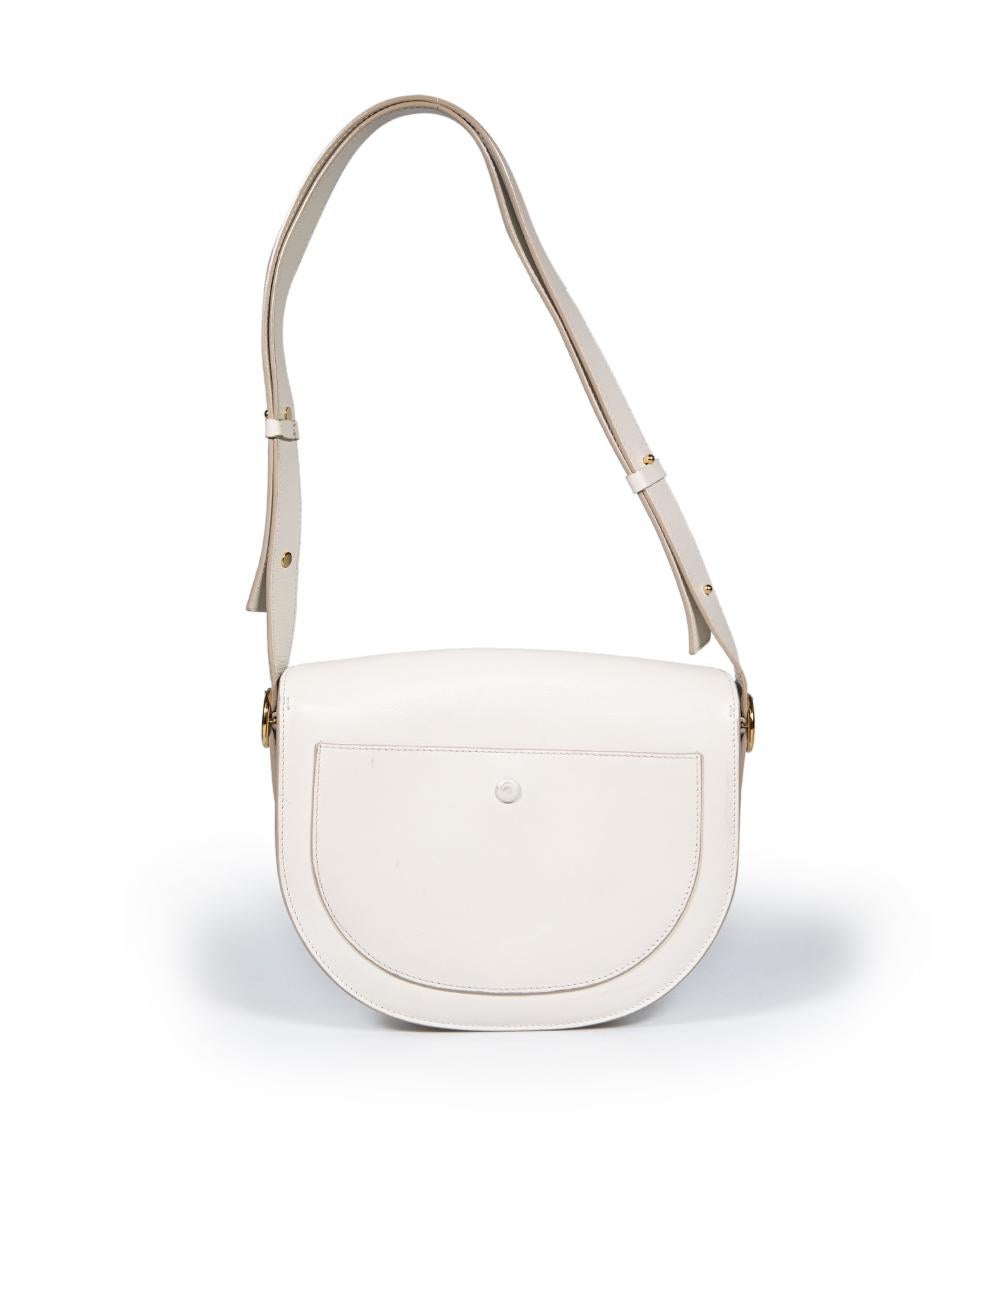 Victoria Beckham Ecru Leather Half Moon Box Shoulder Bag In Good Condition For Sale In London, GB